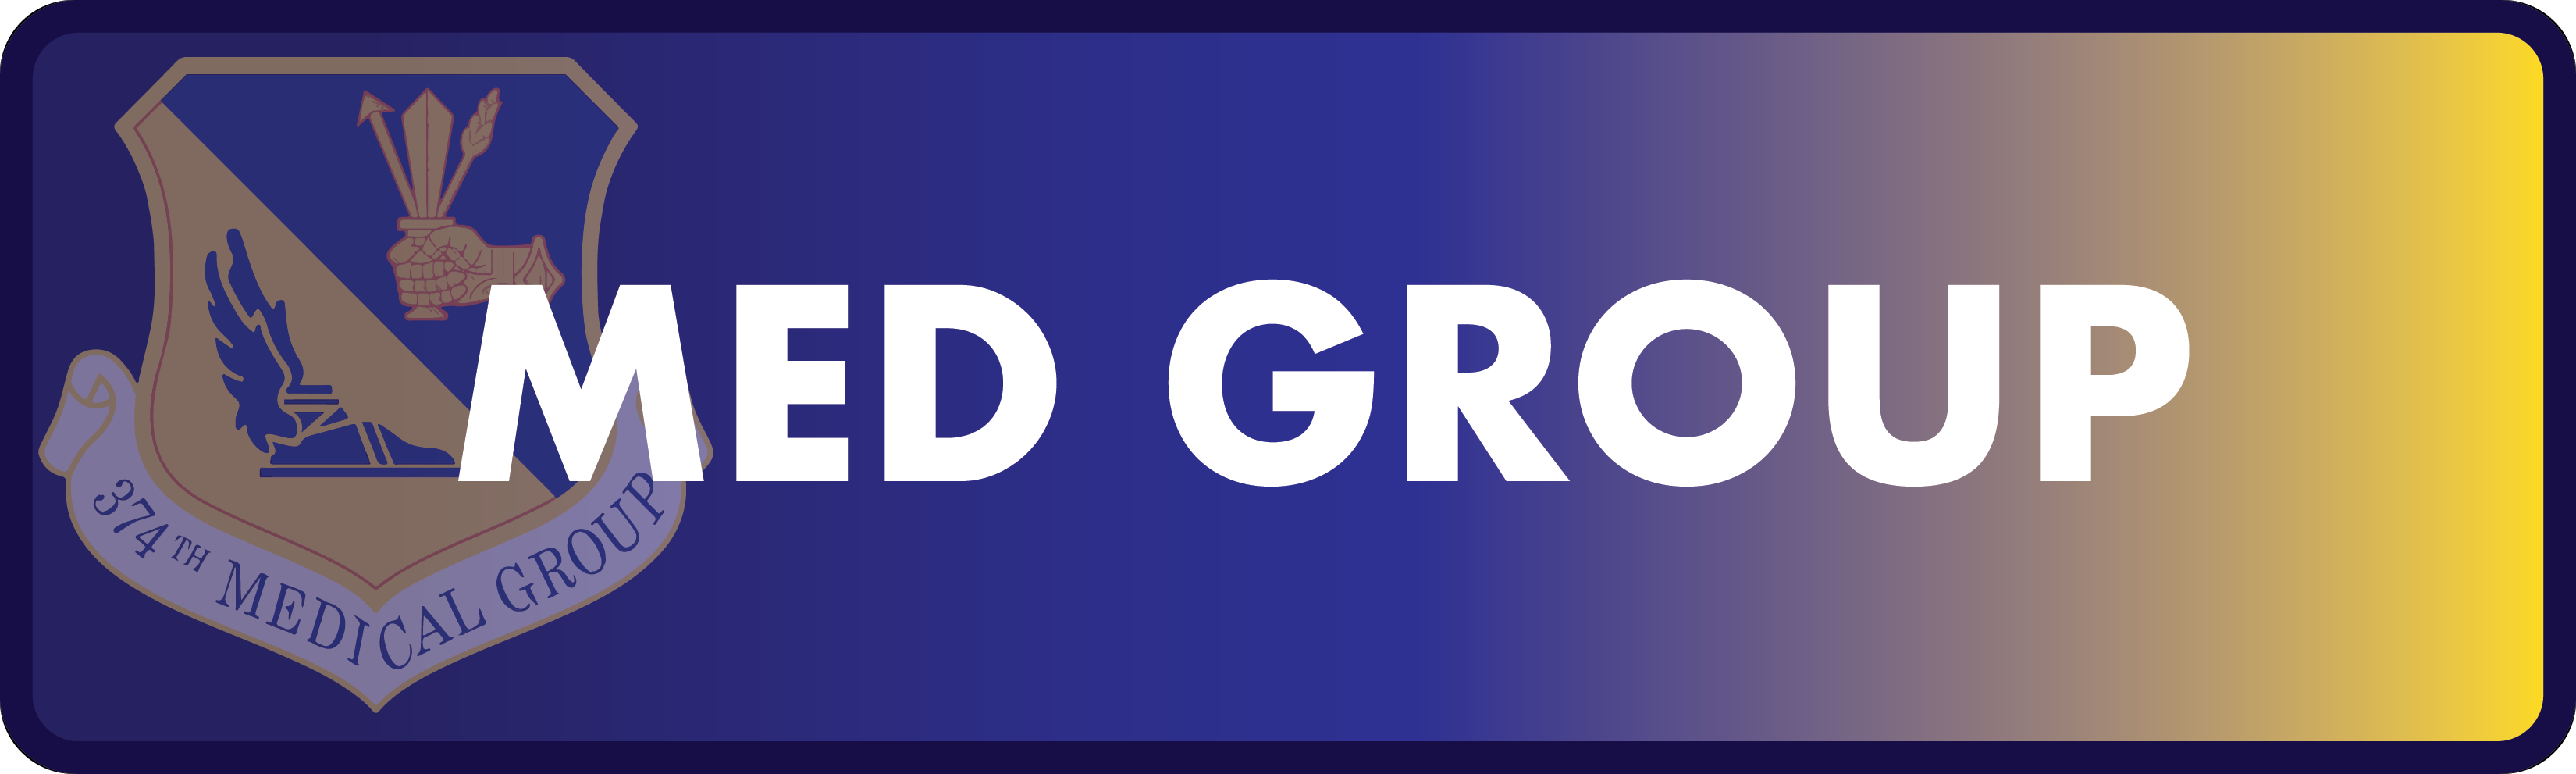 Med Group Button